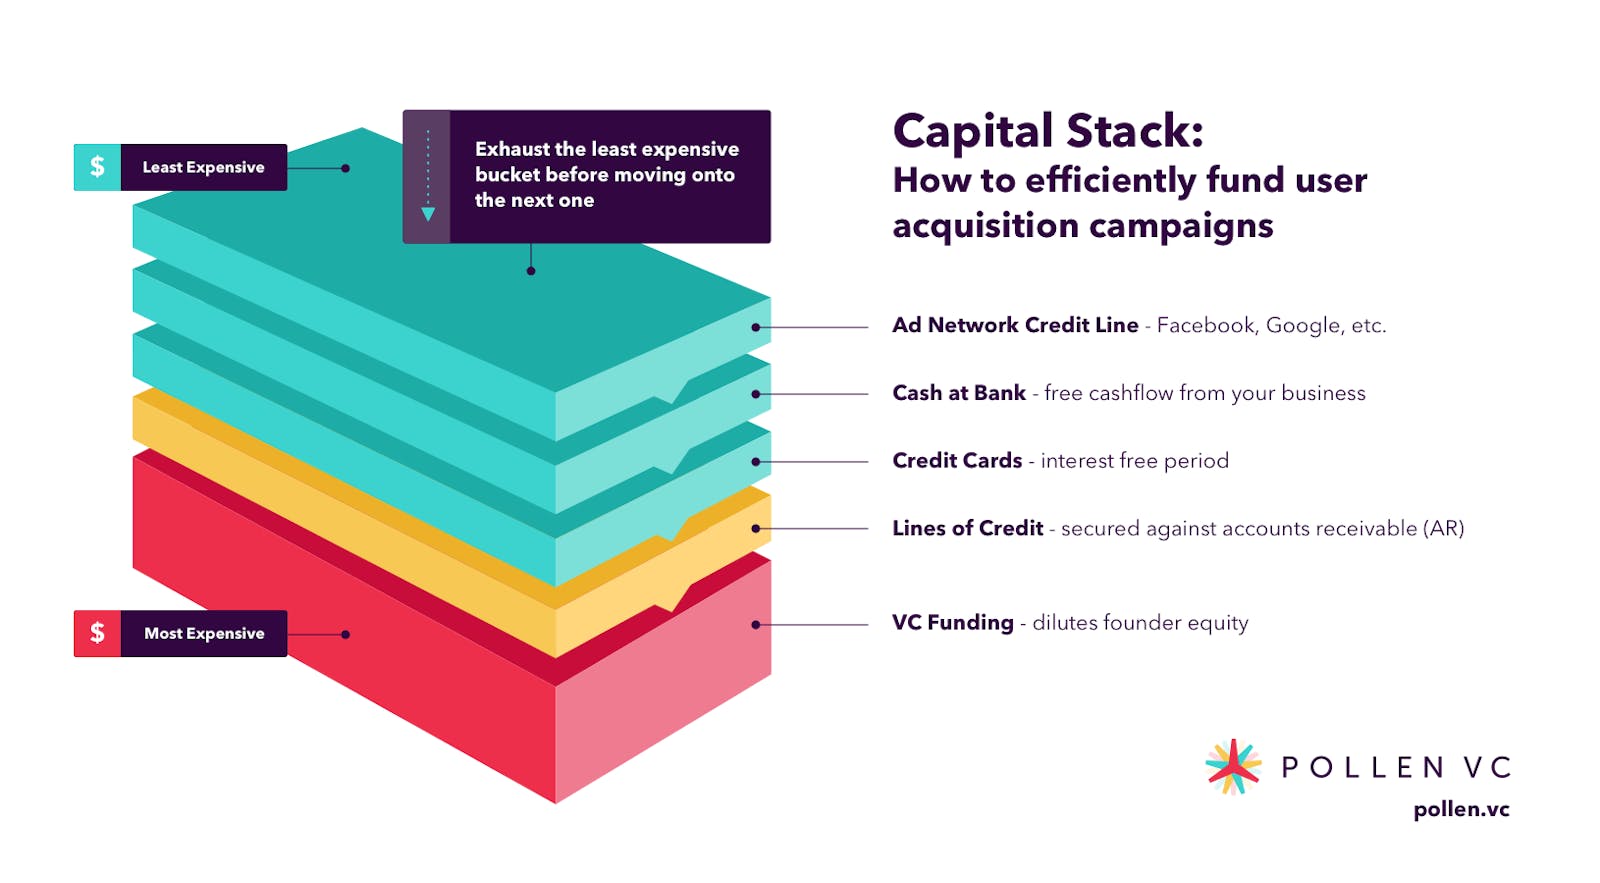 Capital Stack: How to efficiently fund user acquisition campaigns